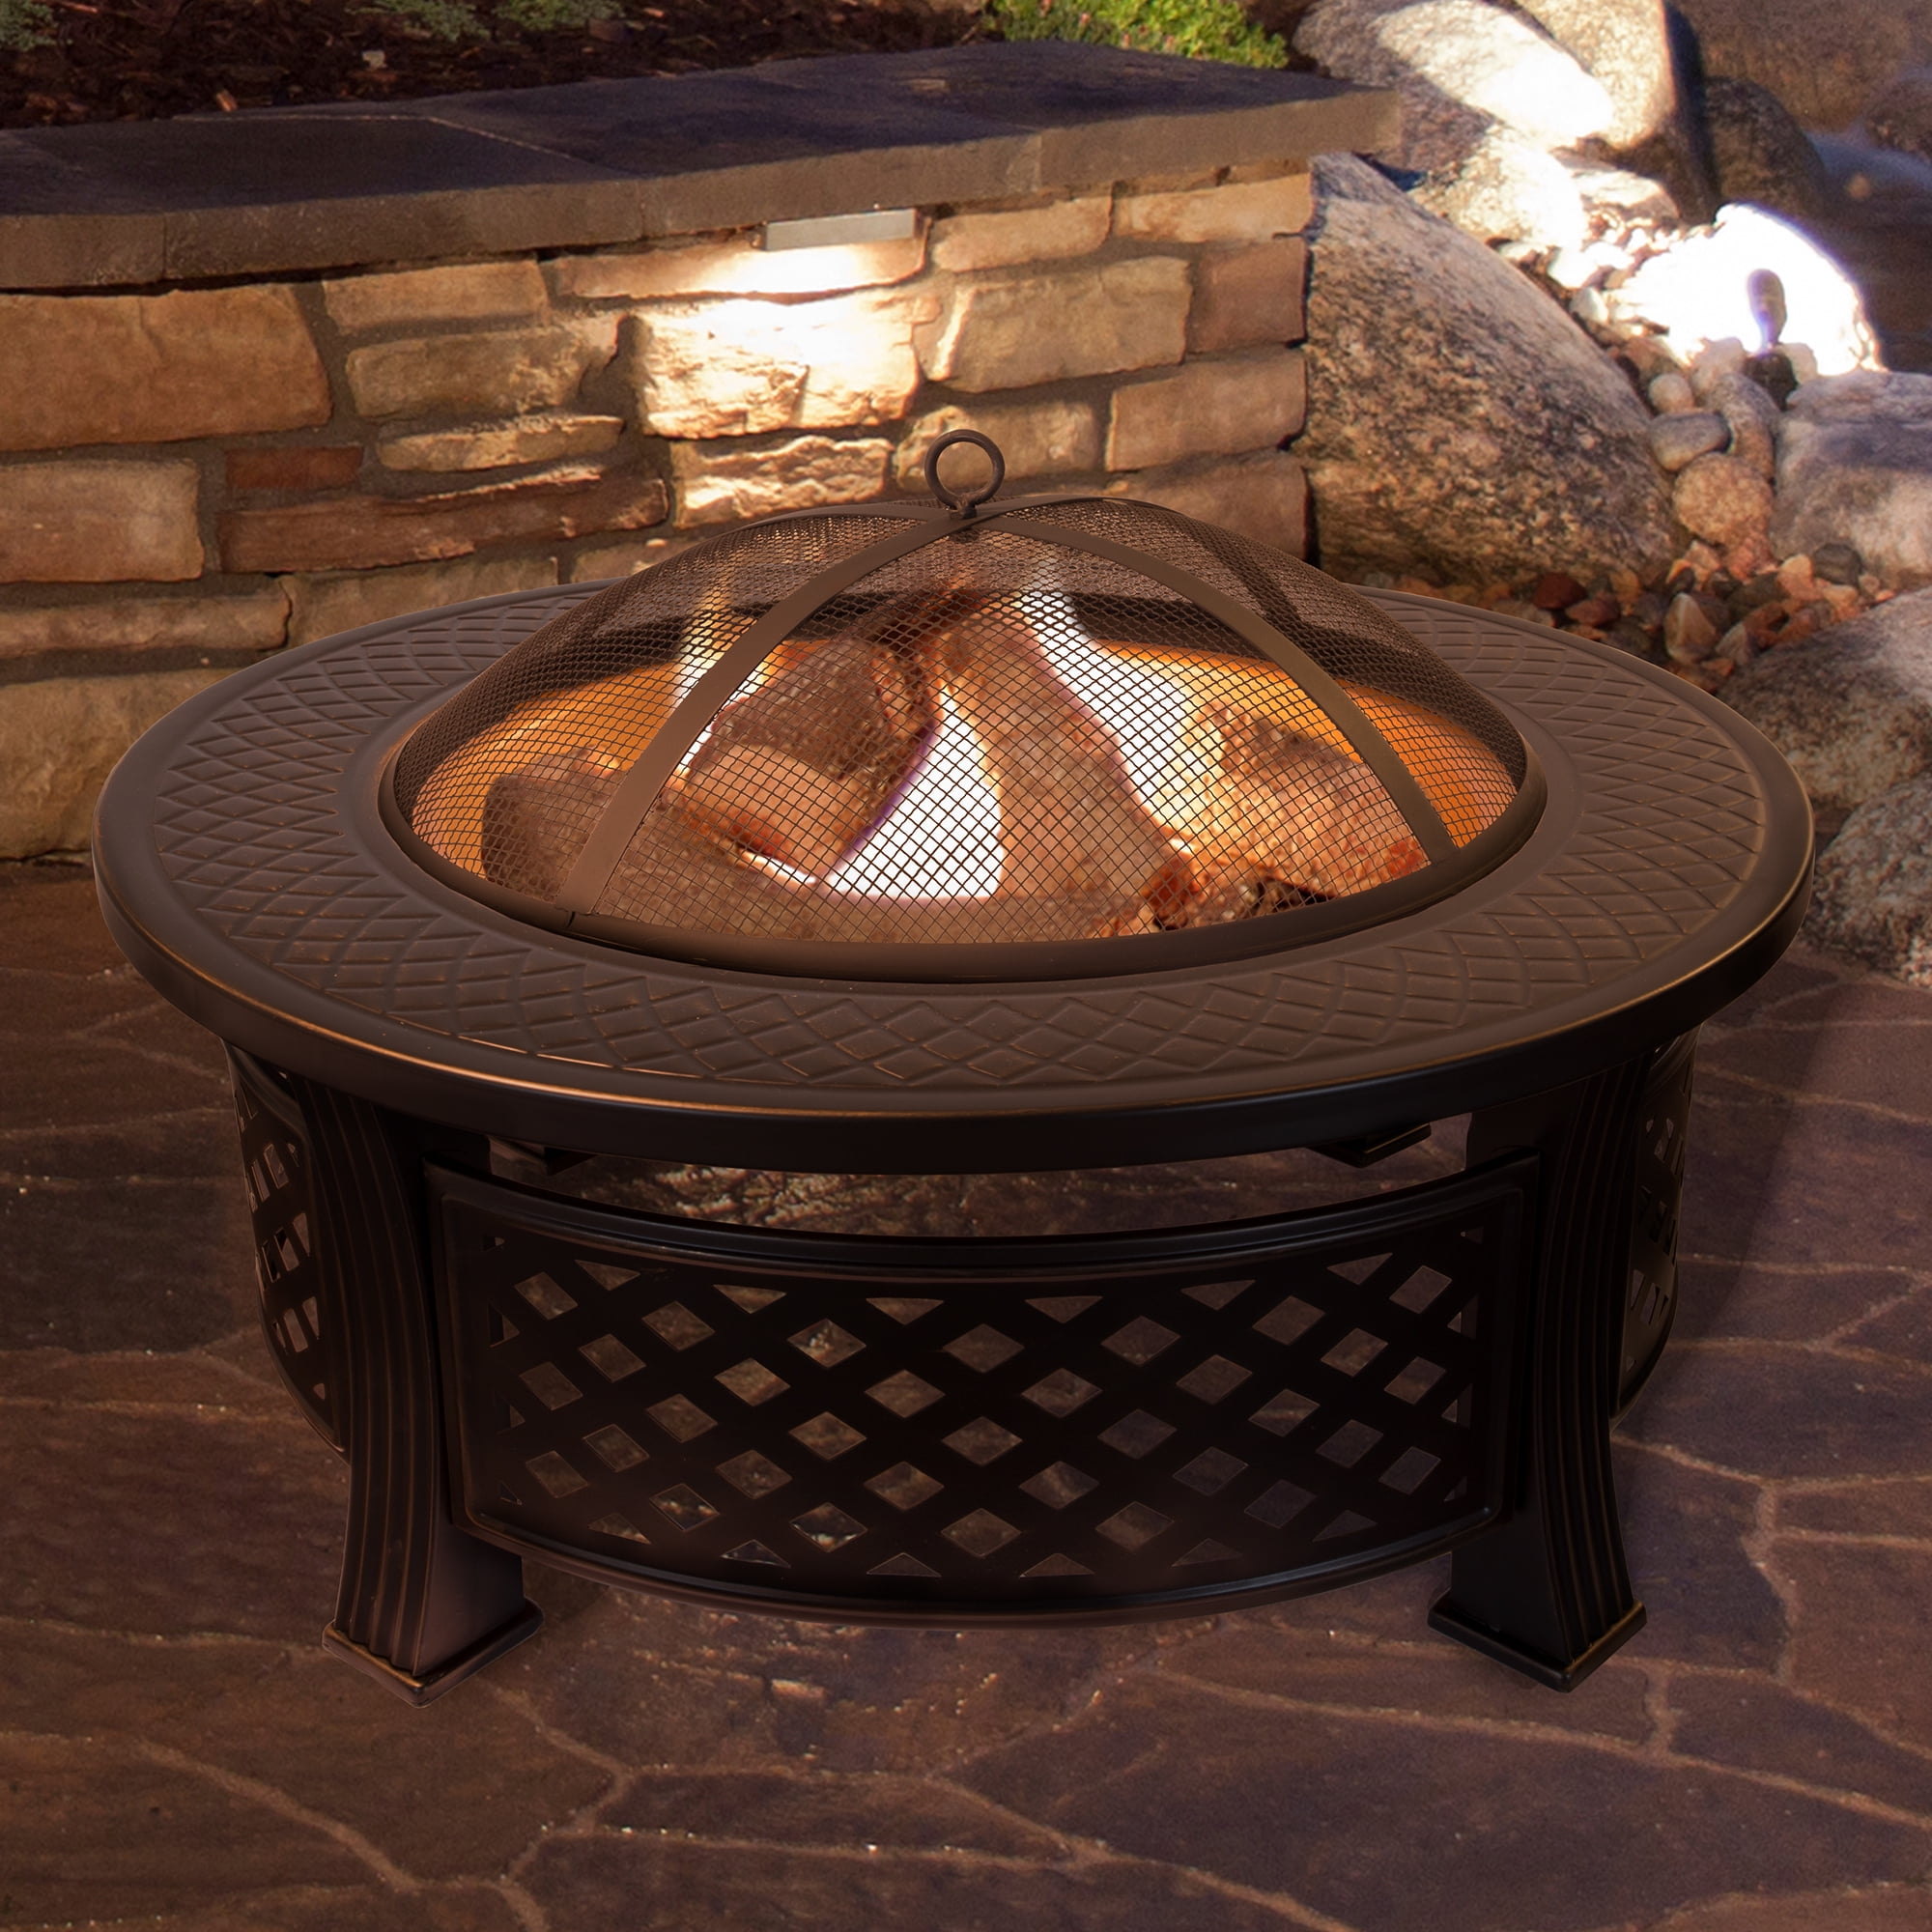 Details about   32in Iron Fire Pit Outdoor Backyard Steel Fire Bowl with Cooking Grills & Poker 